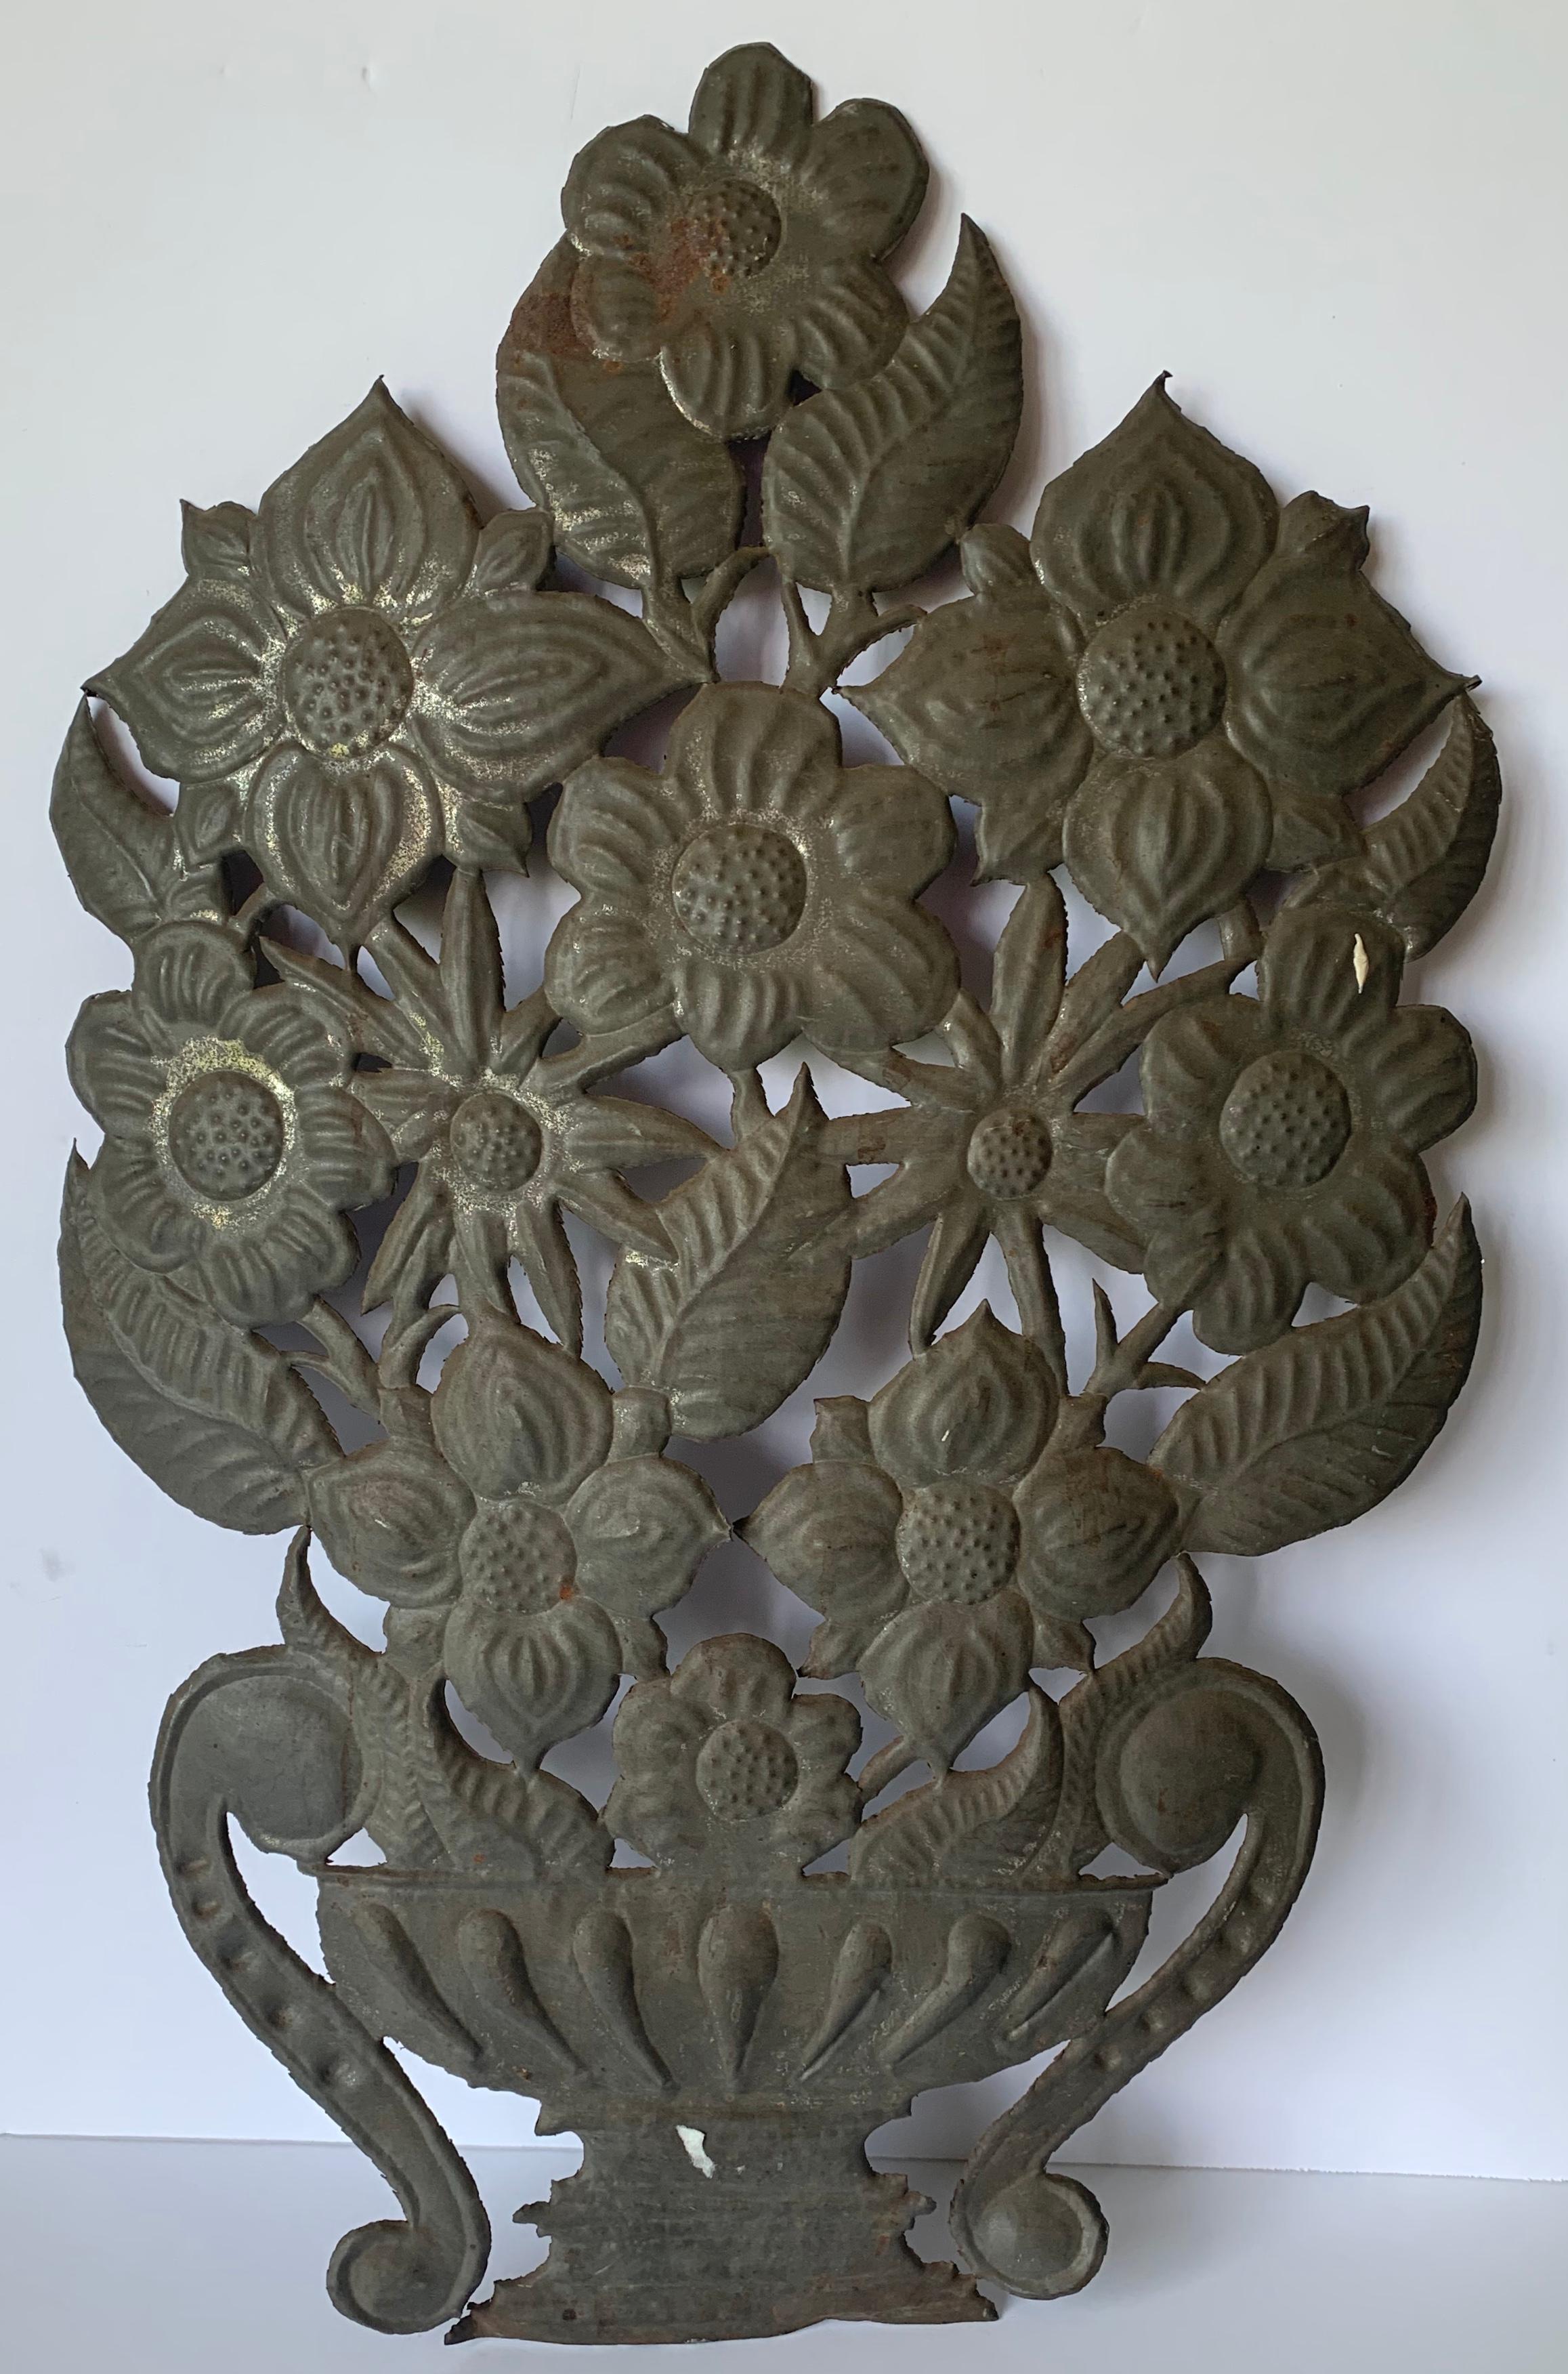 Mexican tin flower motif flat wall hanging. Overall unpolished patina. Hanging hardware not included.